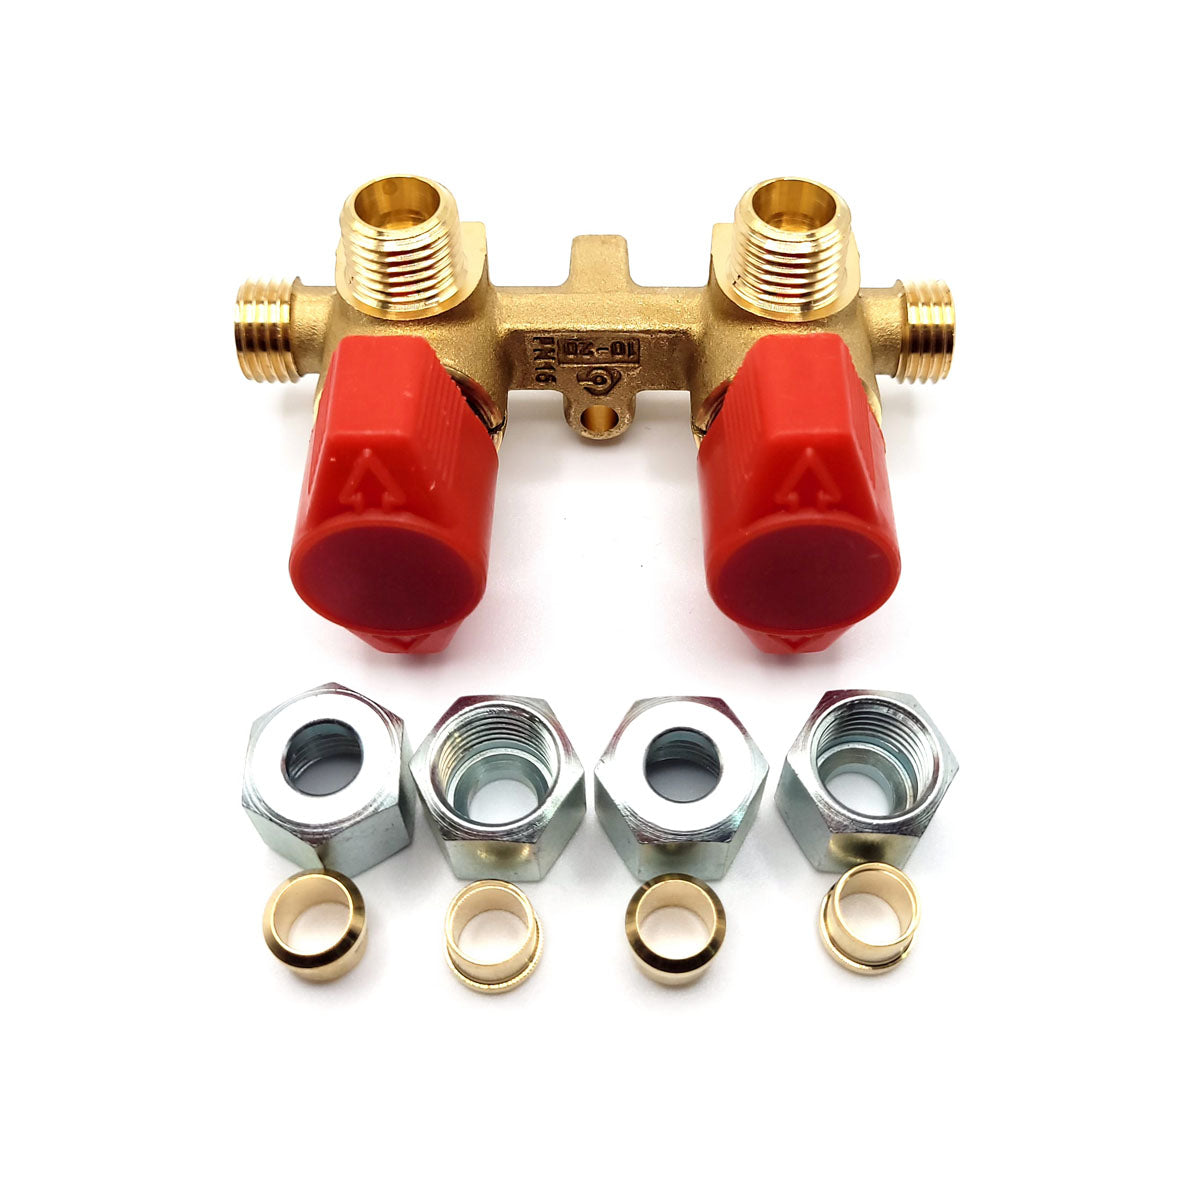 Cavagna Two Way Gas LPG Manifold With Taps for Motorhome Caravan RV